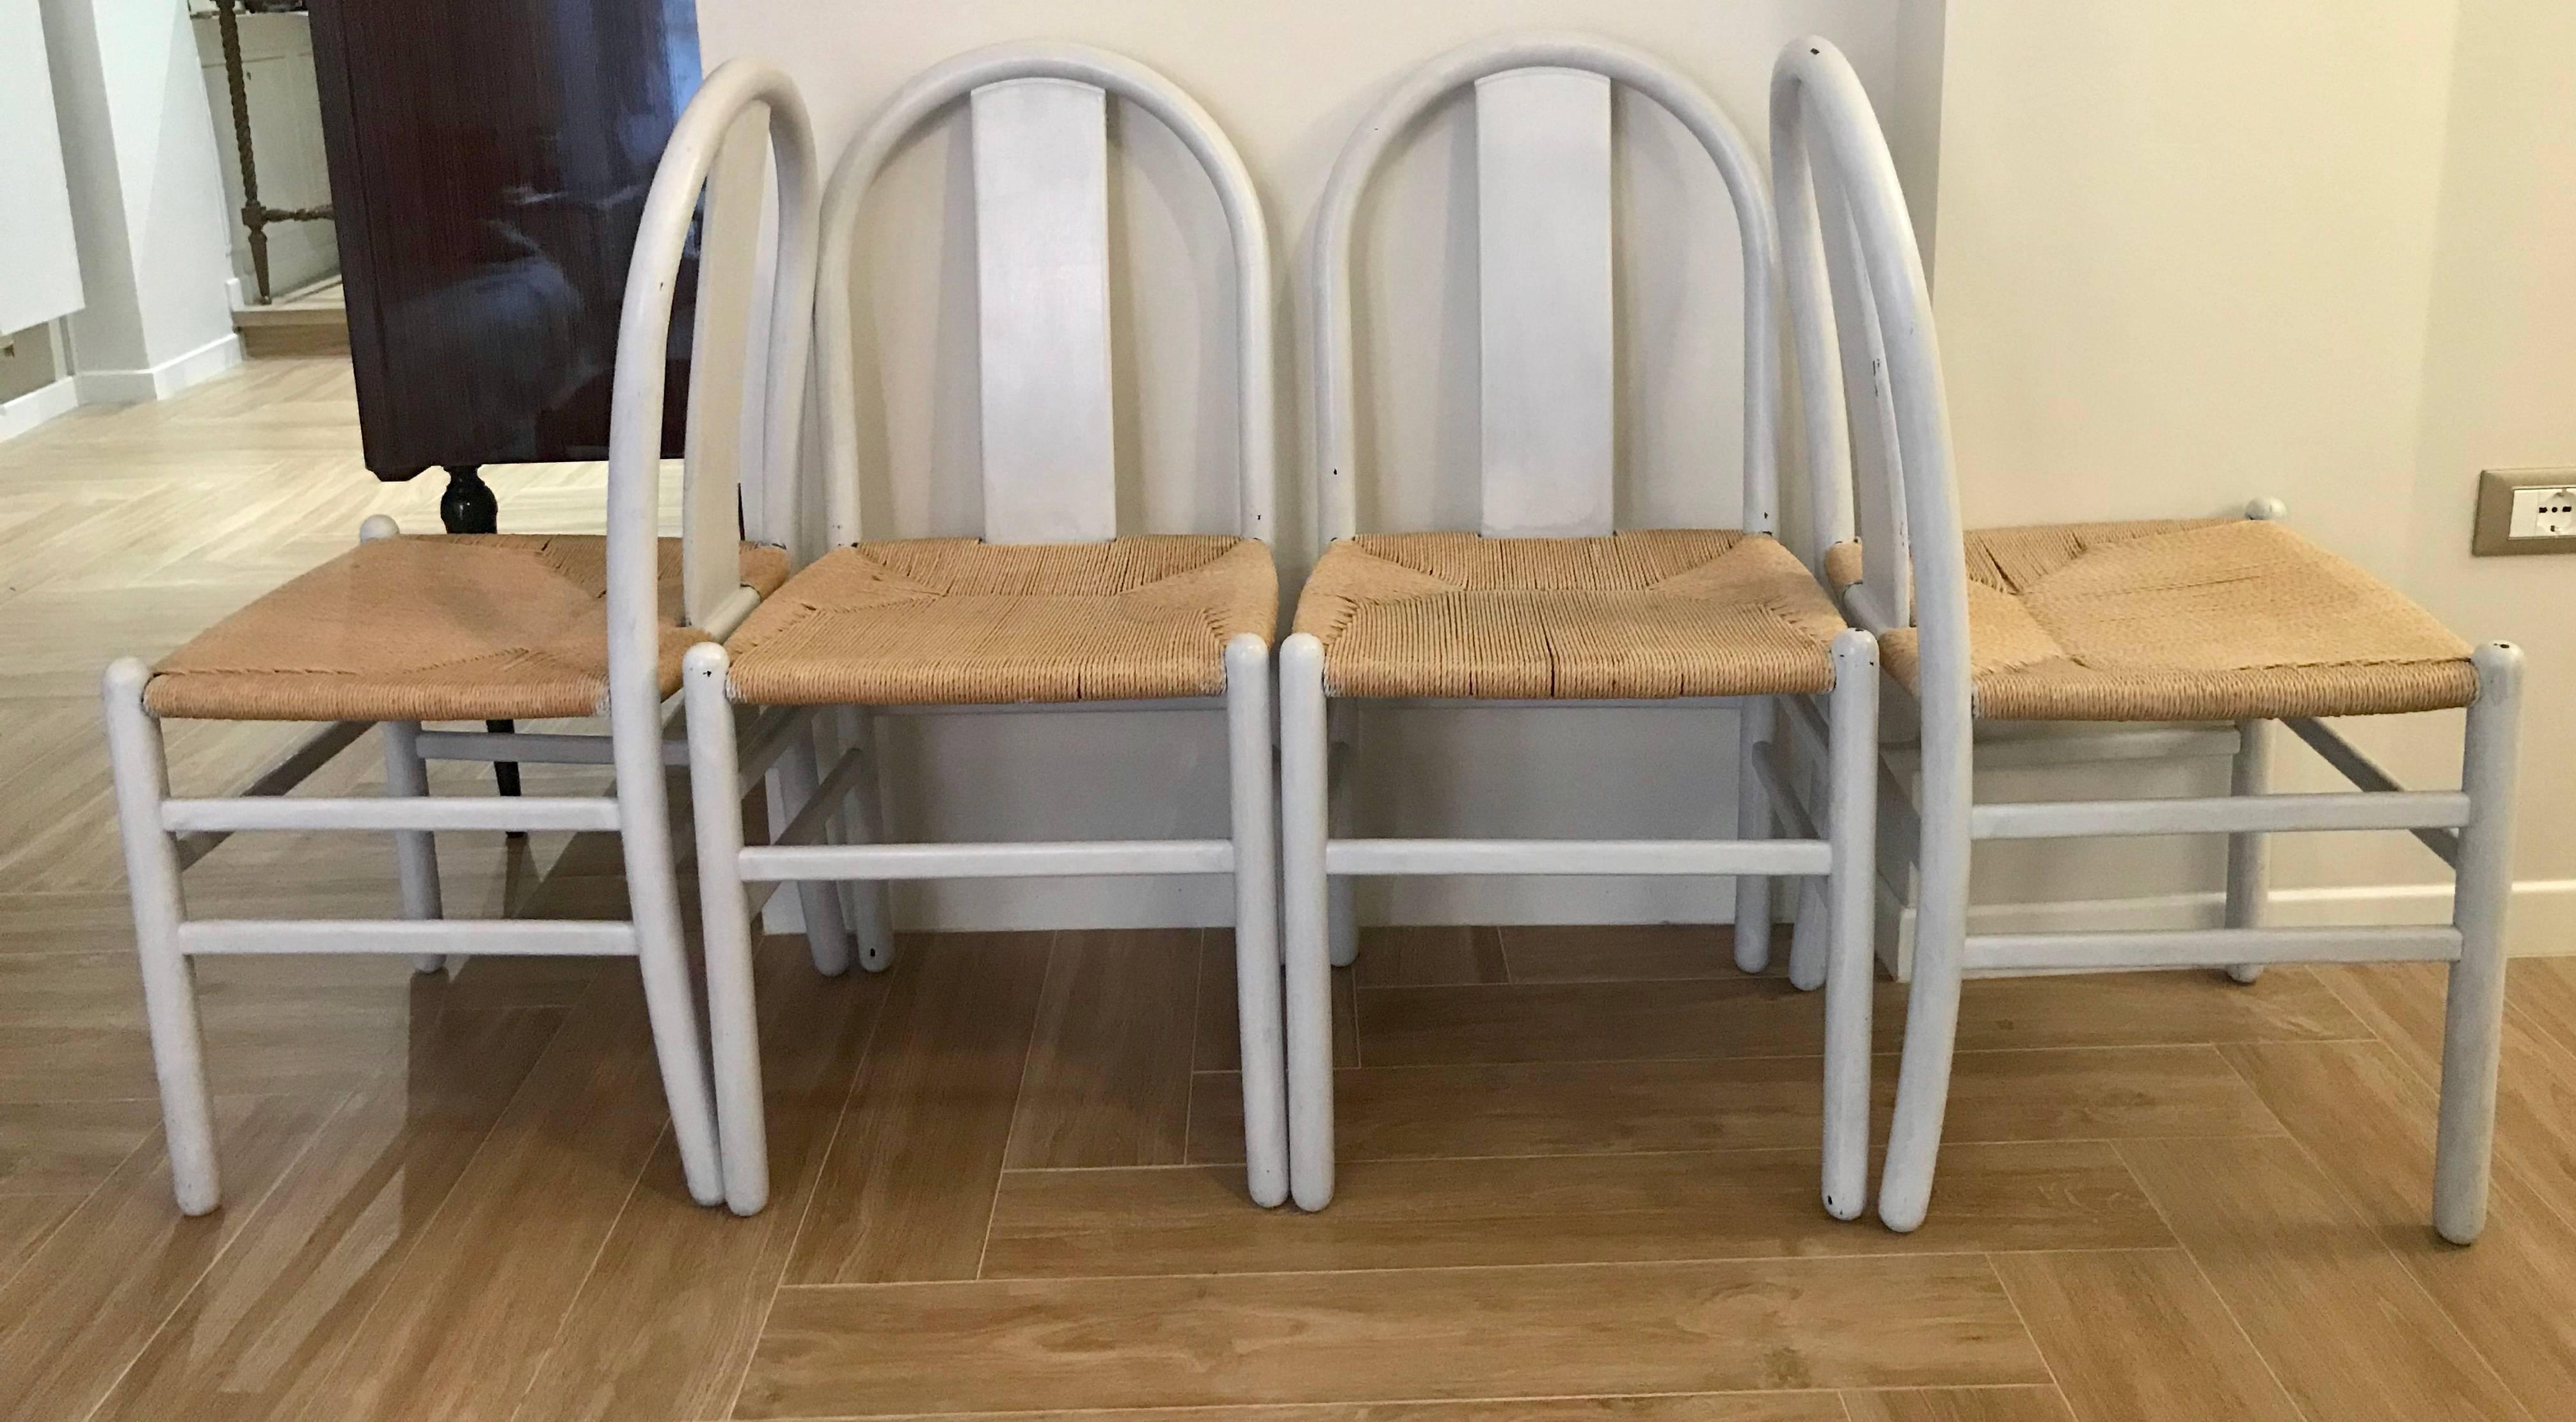 Beautiful Italian rustic four chairs in white or bright color.
The price is for all the chairs

INTERNATIONAL SHIPPING
Our transportation of antique furniture and items is executed with utmost care and with personal flavour in order pick up or bring